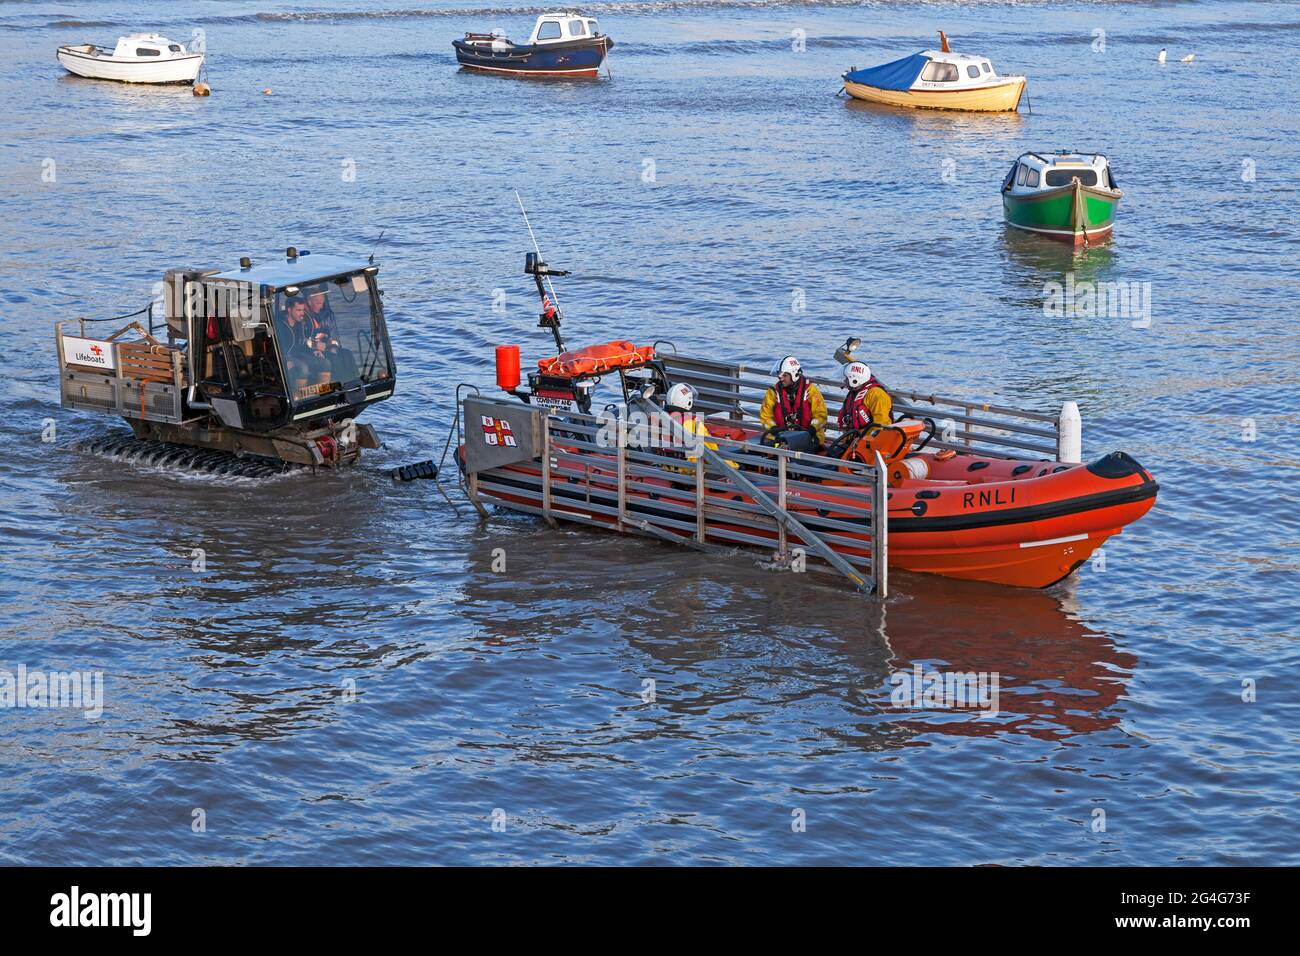 The Atlantic 75 class lifeboat B769 Coventry and Warwickshire with its Loglogic Softrak launch and recovery tractor and trailer in the sea at Weston-super-Mare, UK on 1 February 2015. This lifeboat has since been retired. Stock Photo